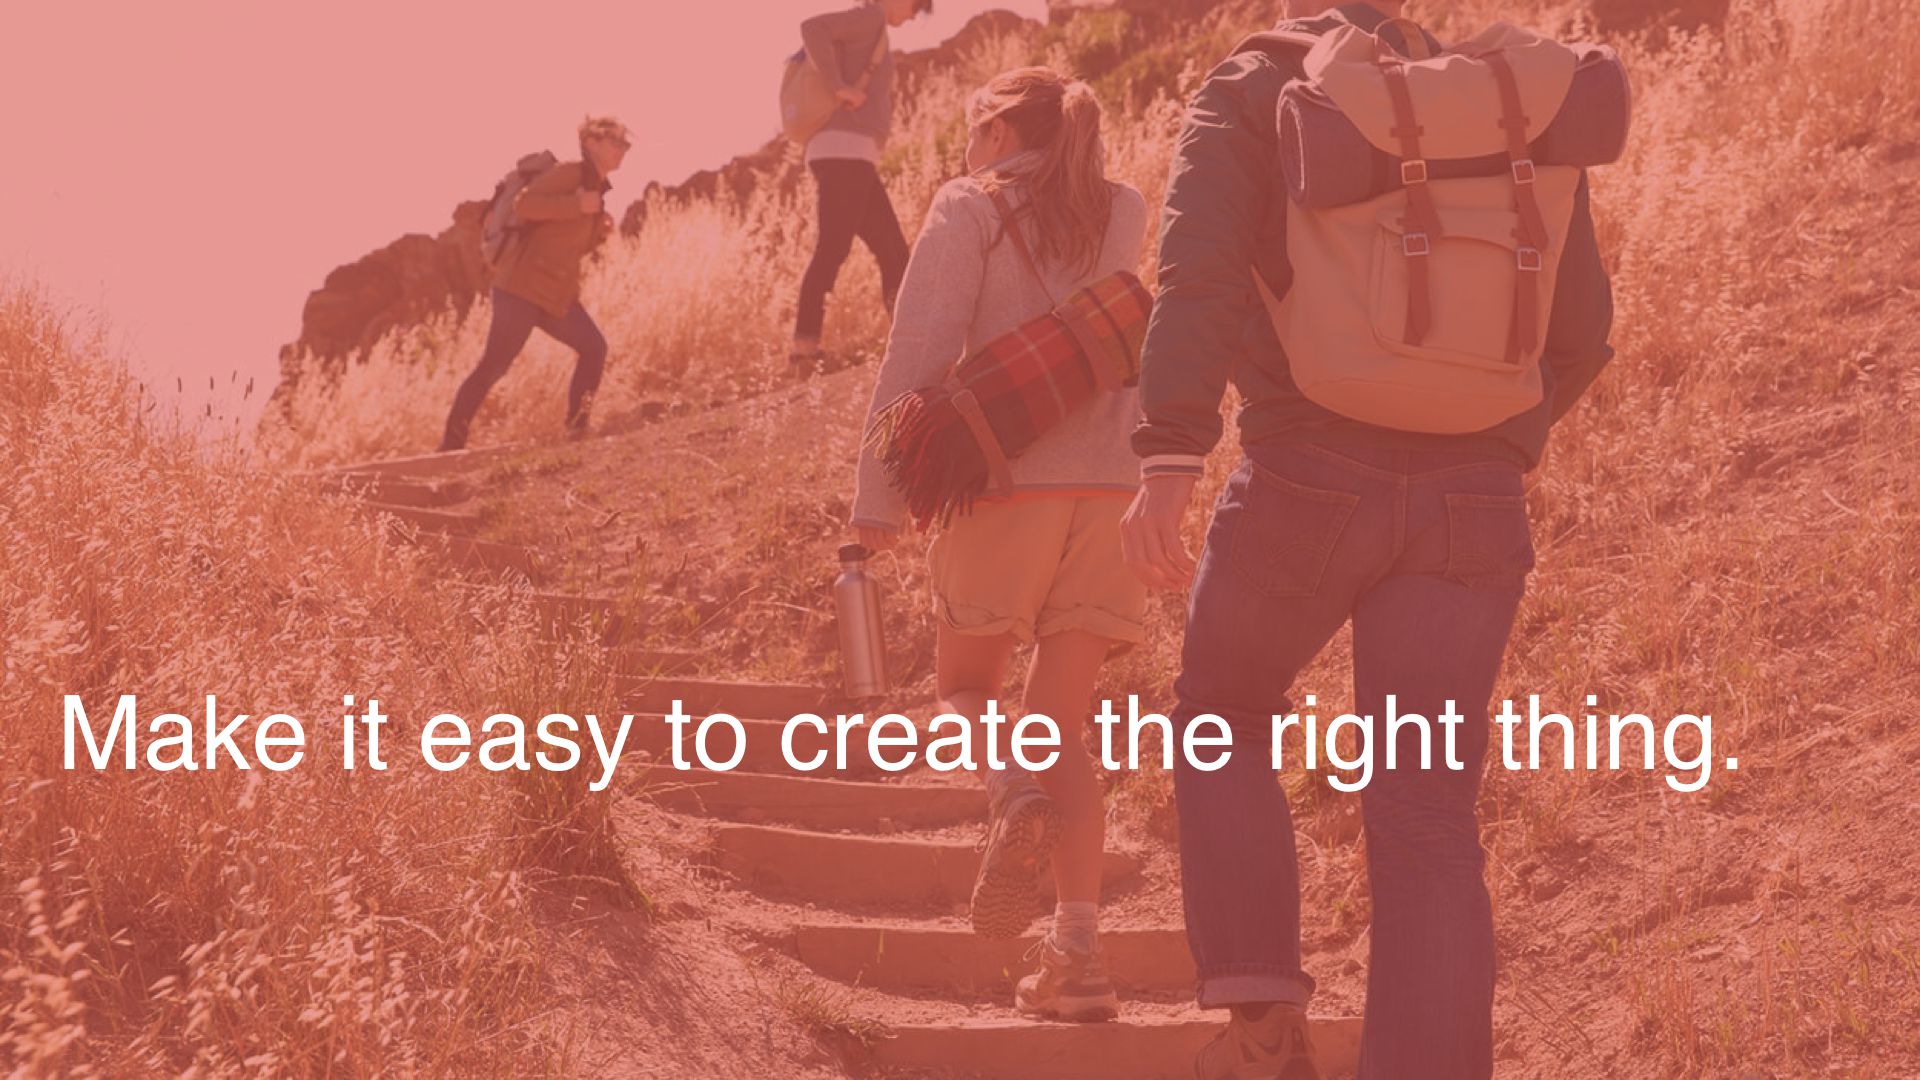 Background photo of stairs cut into the side of a hill and people carrying daypacks casually hiking. Text overlaid: Make it easy to do the right thing.